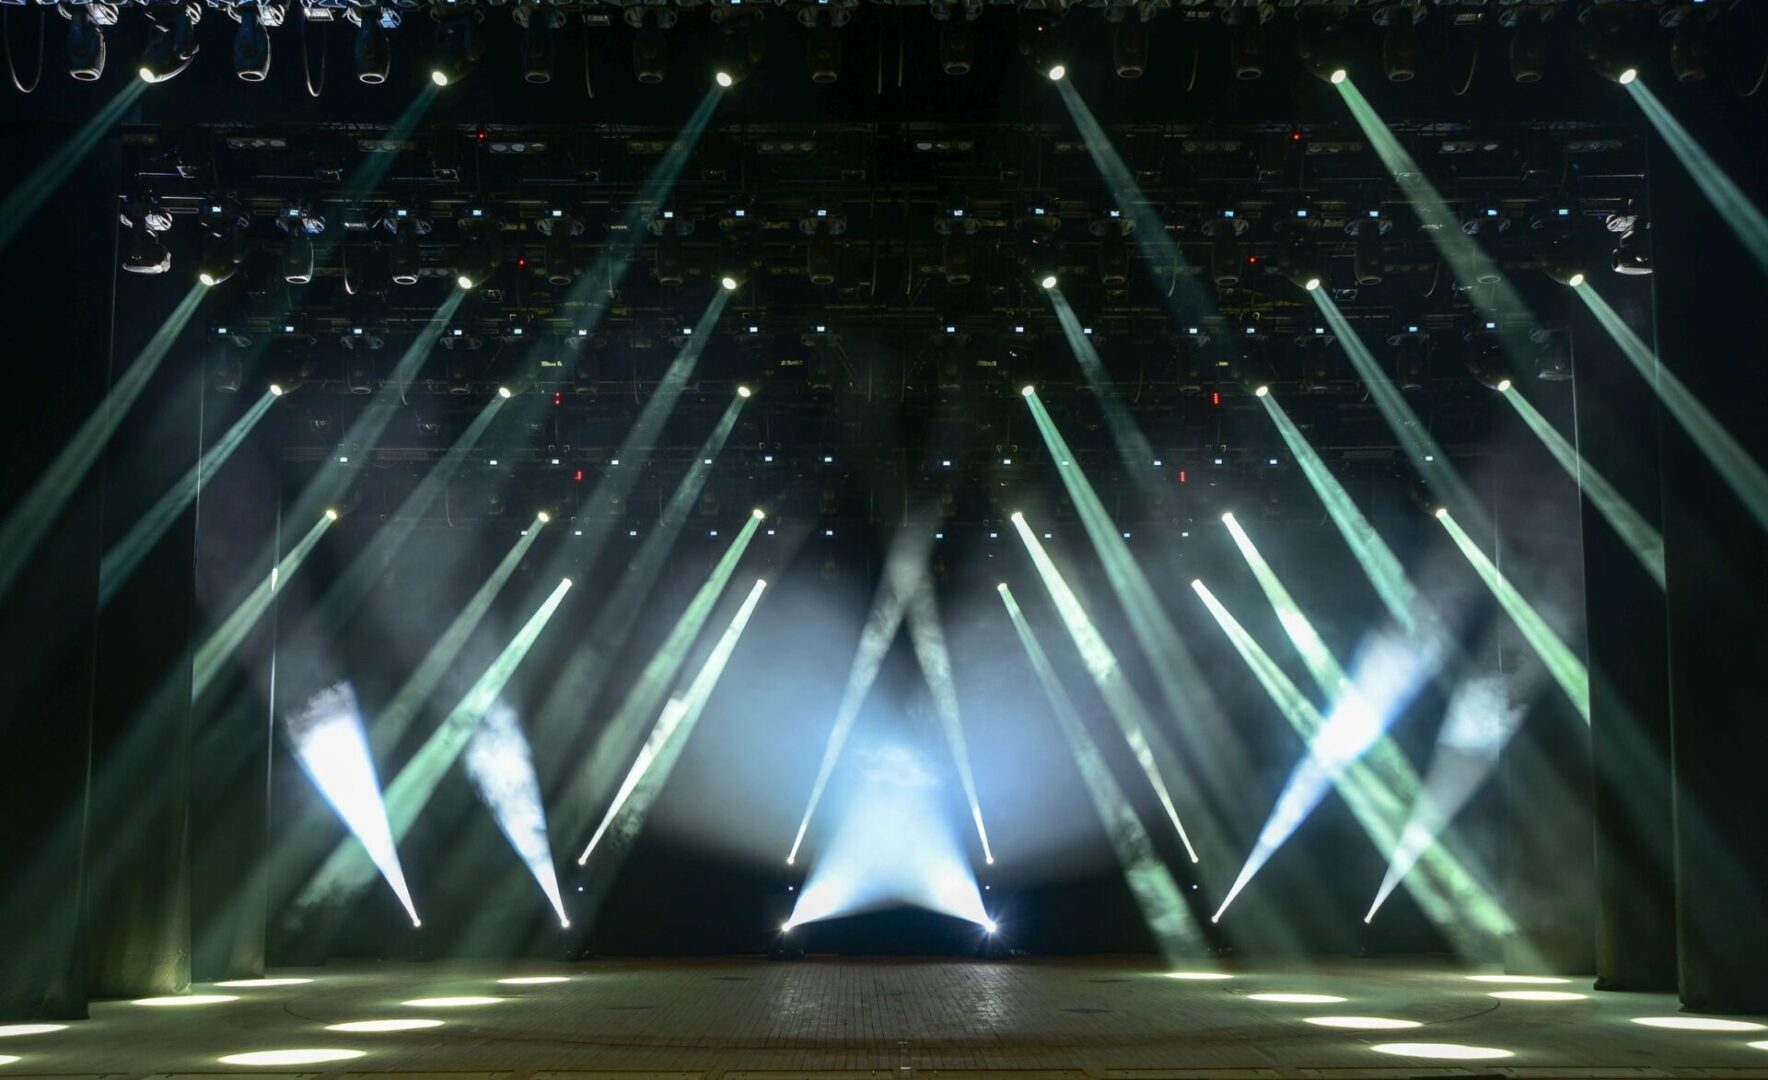 Stage lights with mist effects